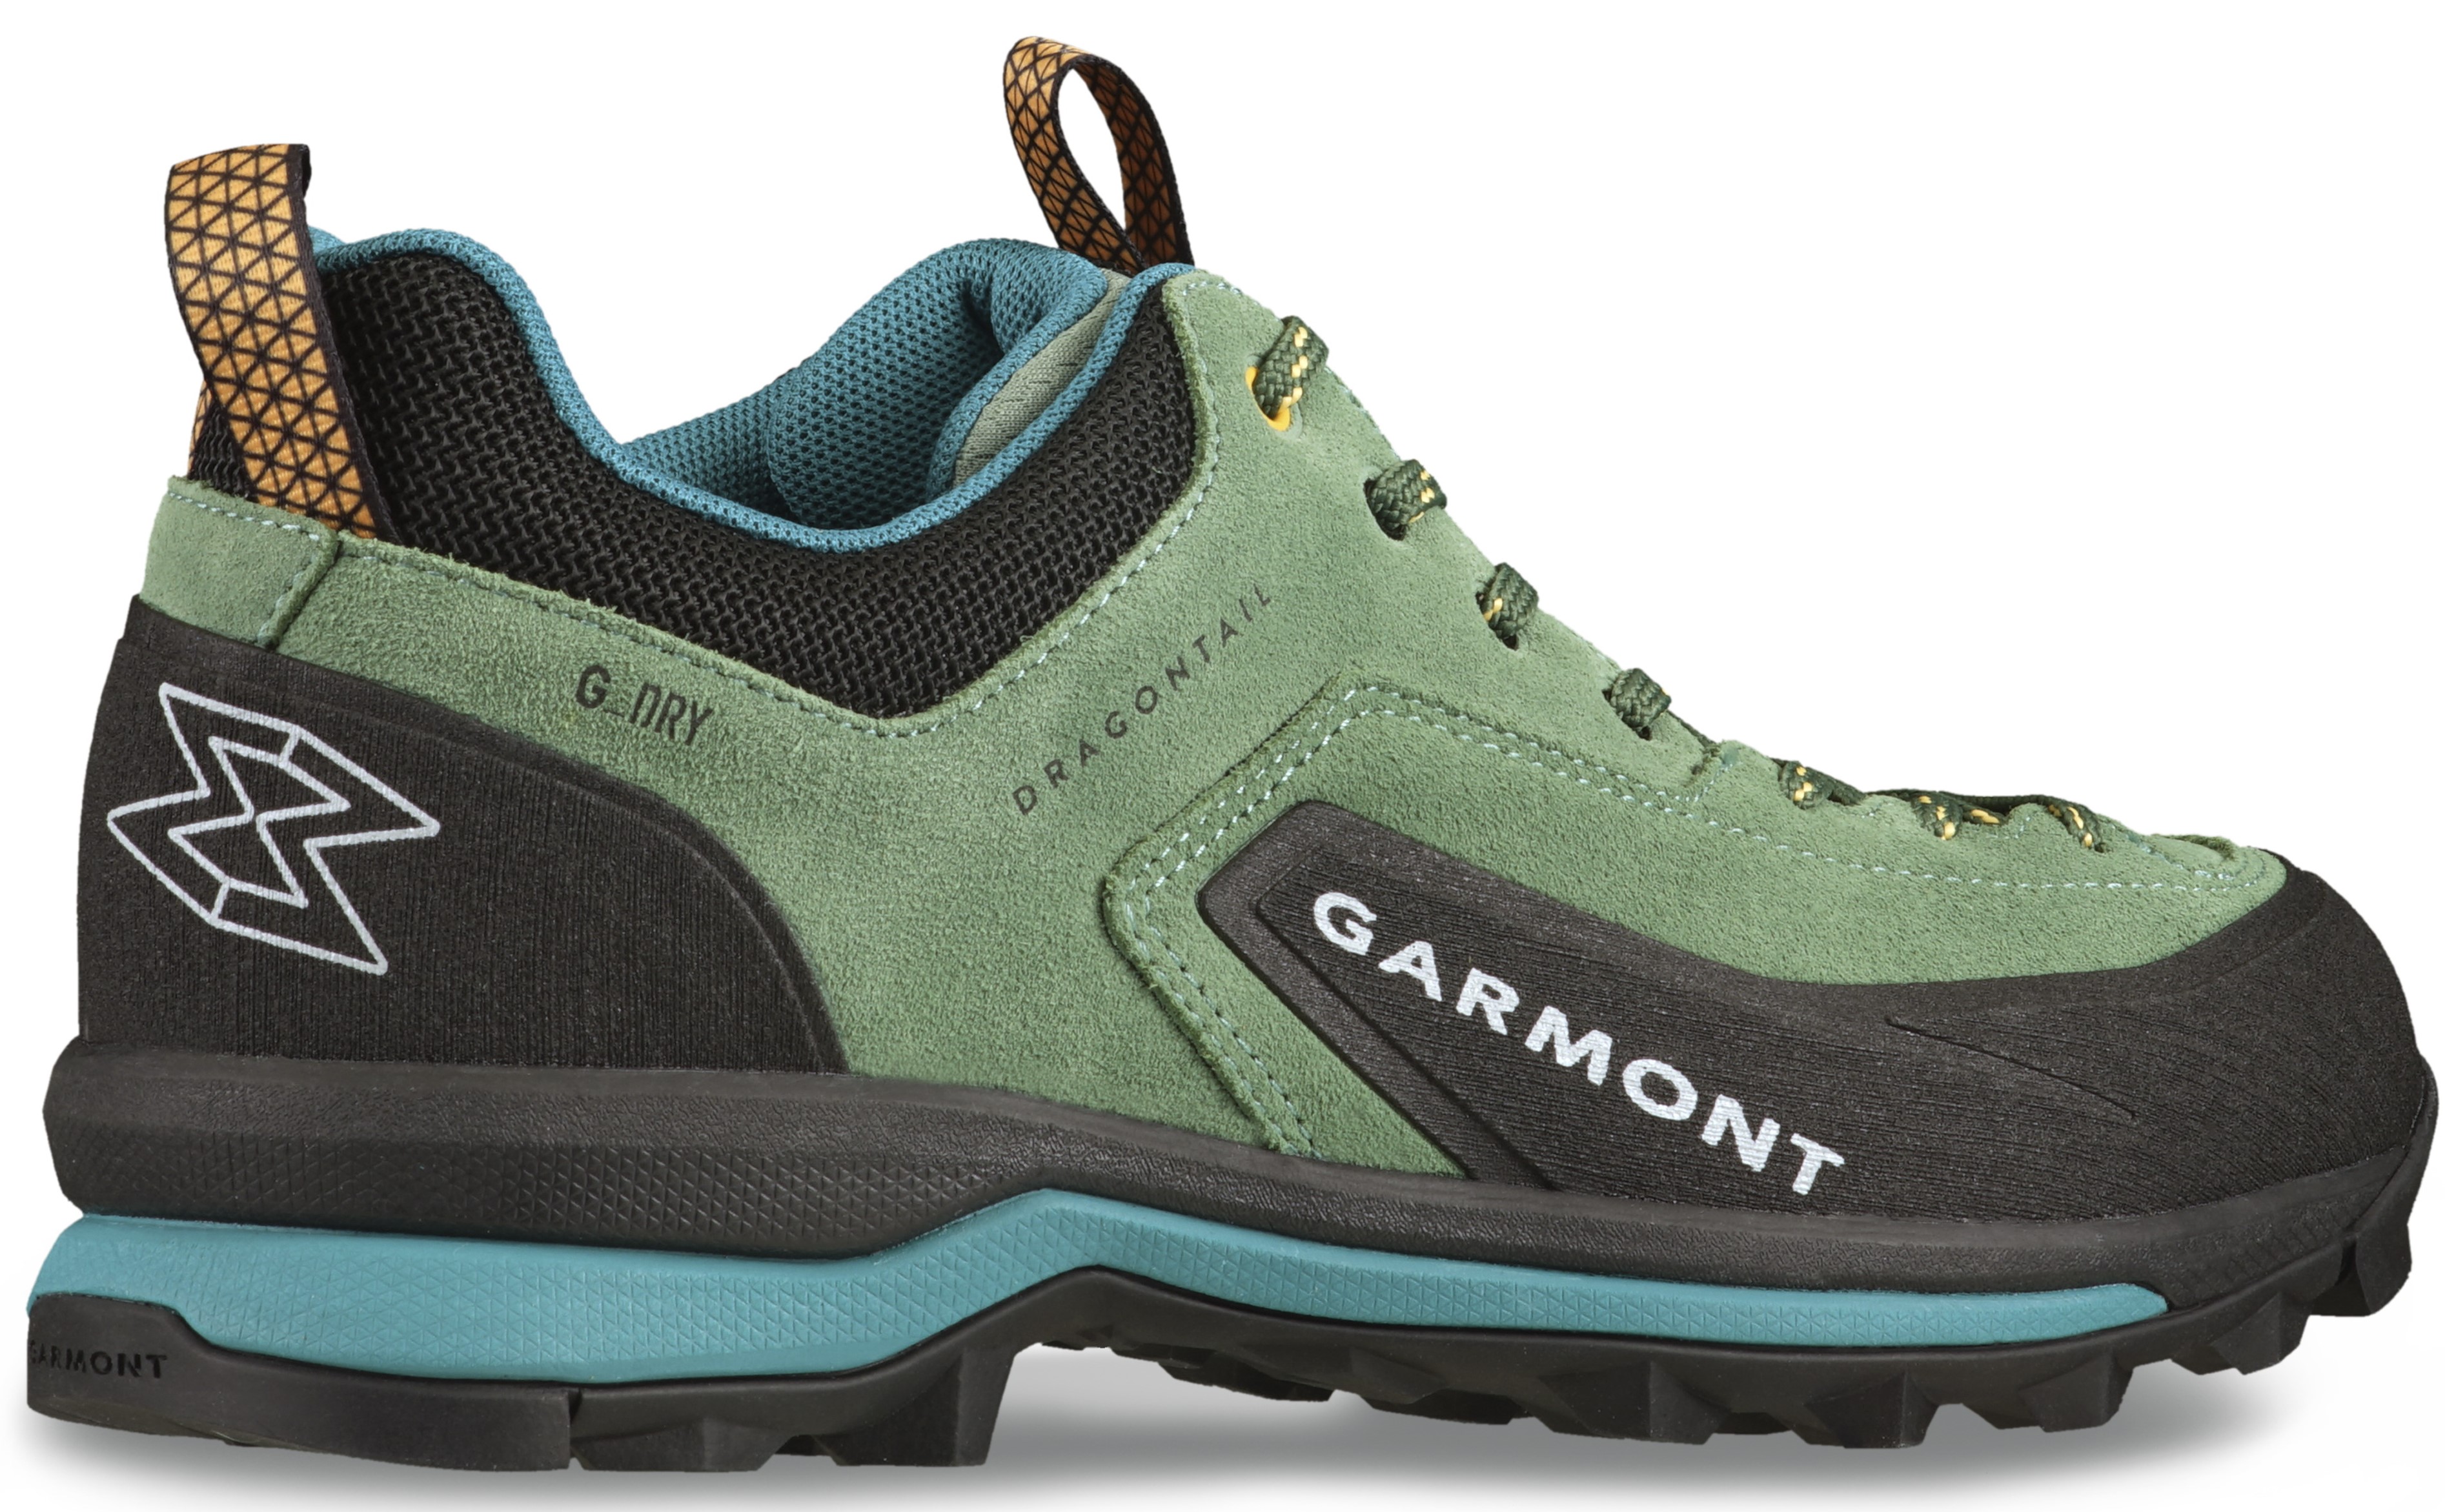 E-shop Garmont DRAGONTAIL G-DRY frost green/green